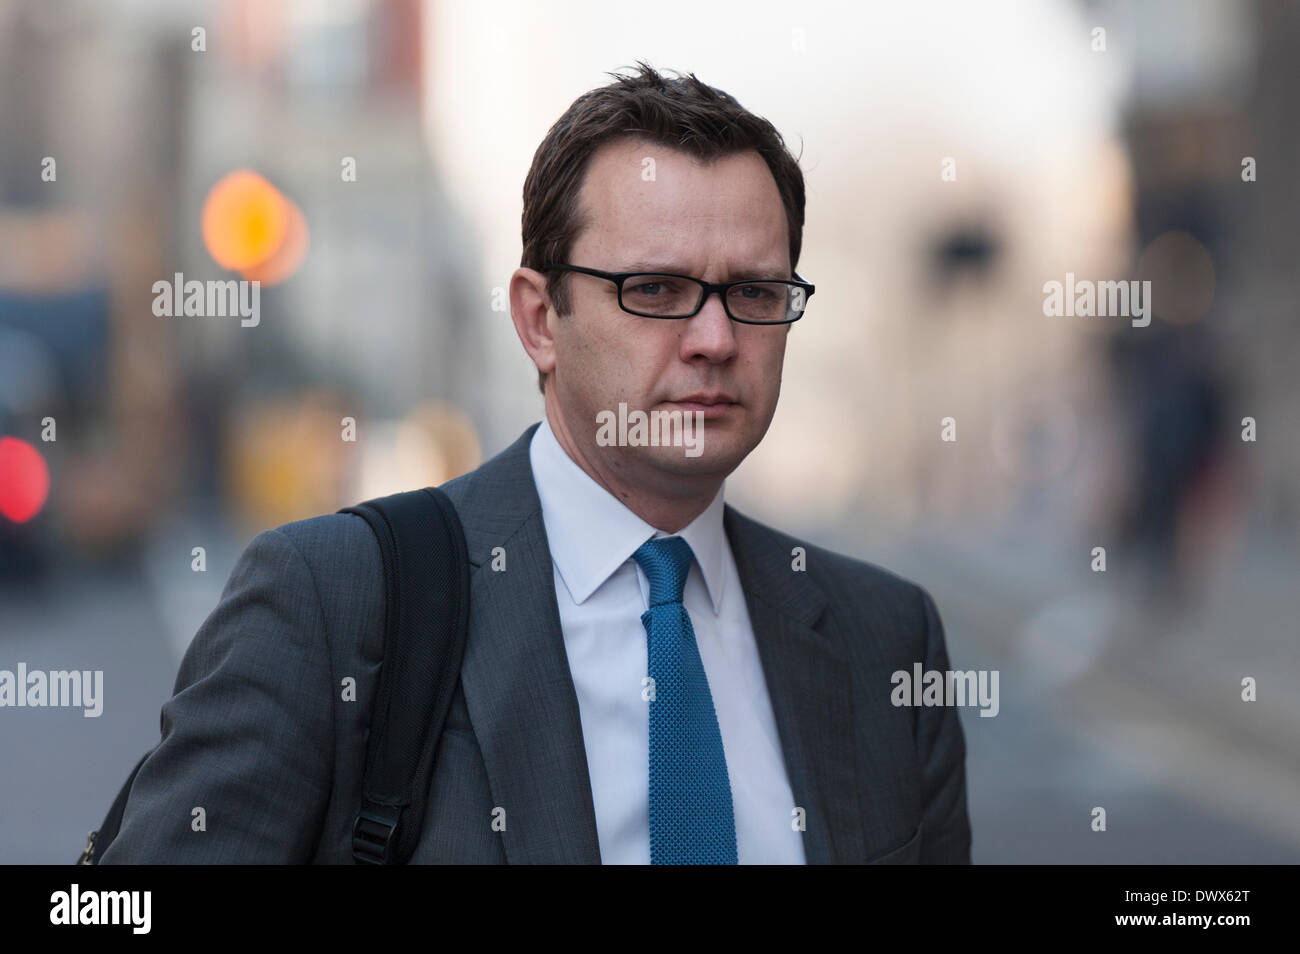 London, UK. 14 March 2014. The trial of former News International chief executive Rebekah Brooks, Andy Coulson and others linked with alleged phone-hacking at the former newspaper News of the World, continues at the Old Bailey, London. Pictured: ANDY COULSON. Credit:  Lee Thomas/Alamy Live News Stock Photo